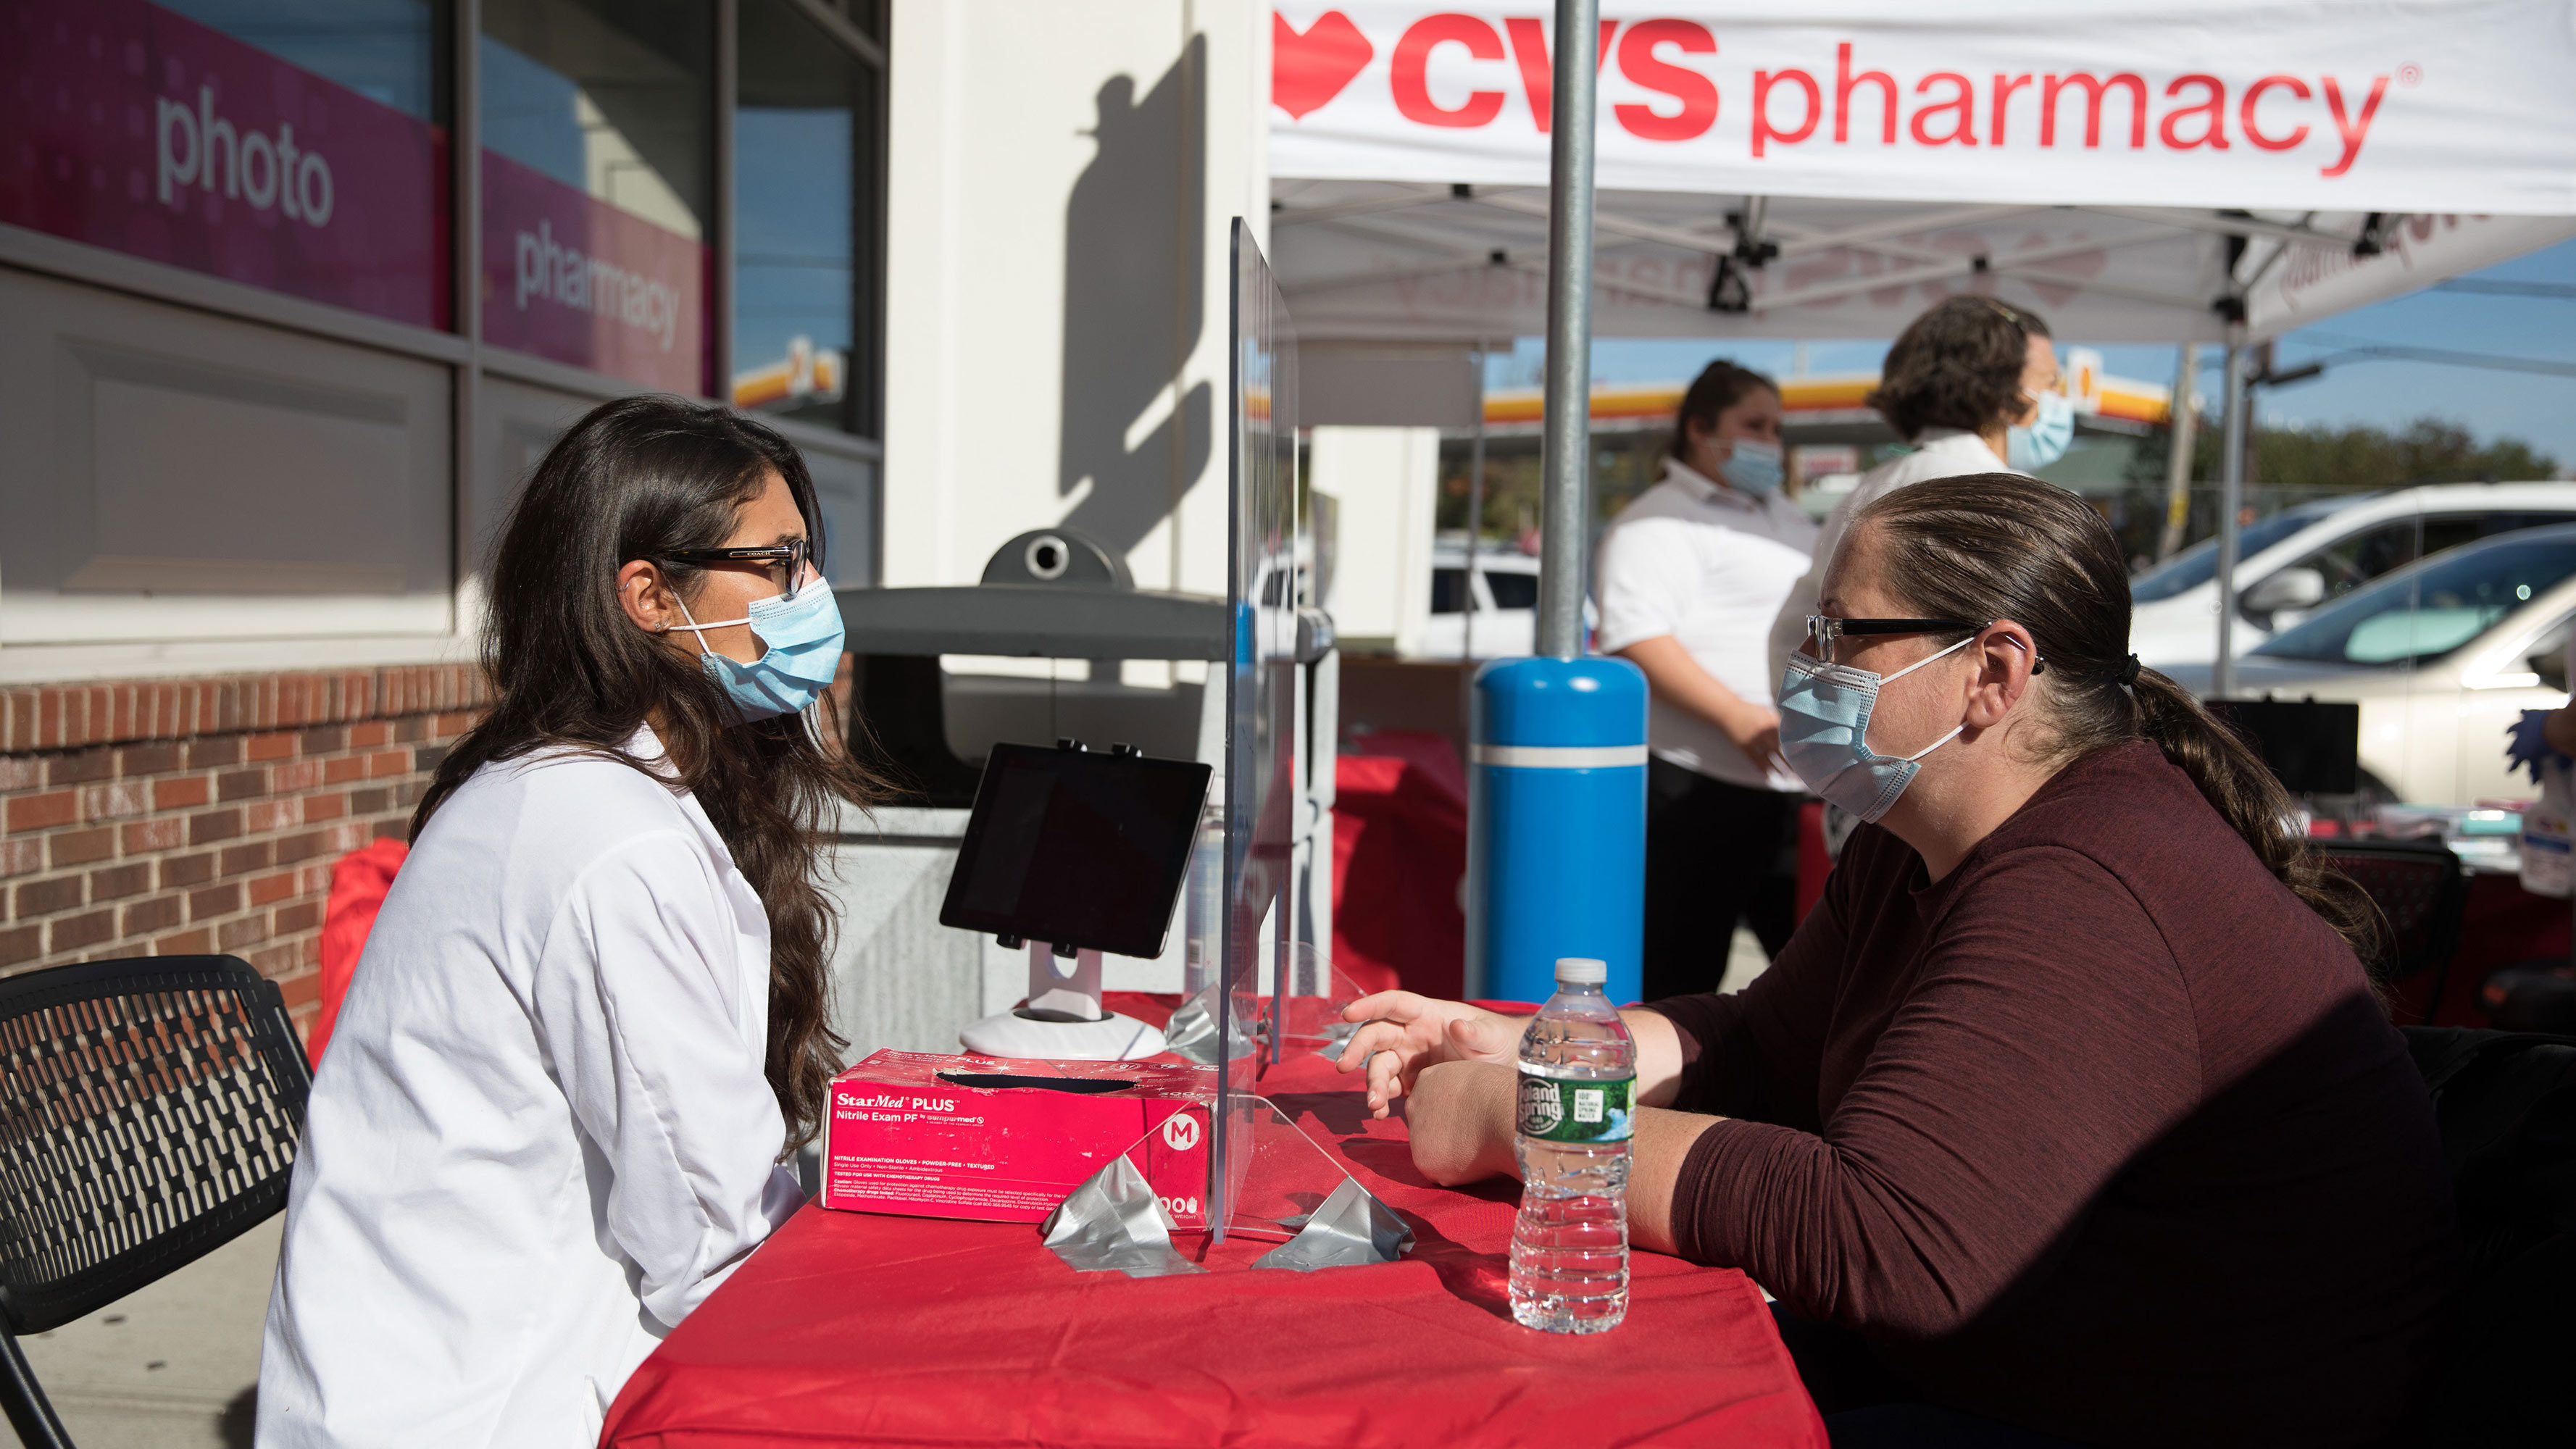 A Project Health screening event, seen at a CVS Pharmacy location.